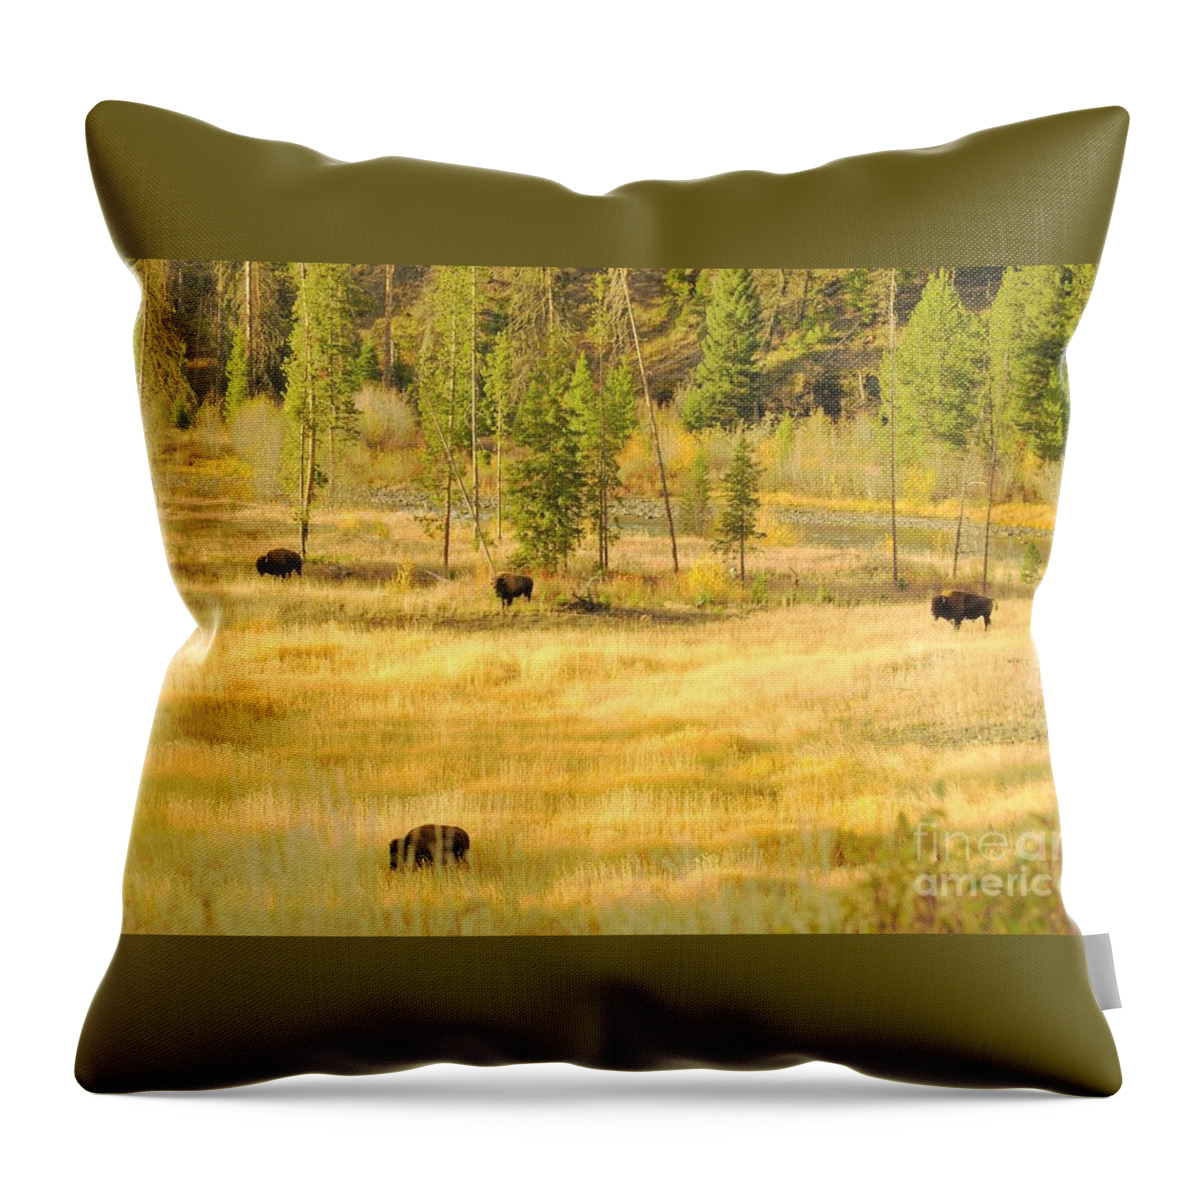 Yellowstone National Park Throw Pillow featuring the photograph Yellowstone Bison by Merle Grenz